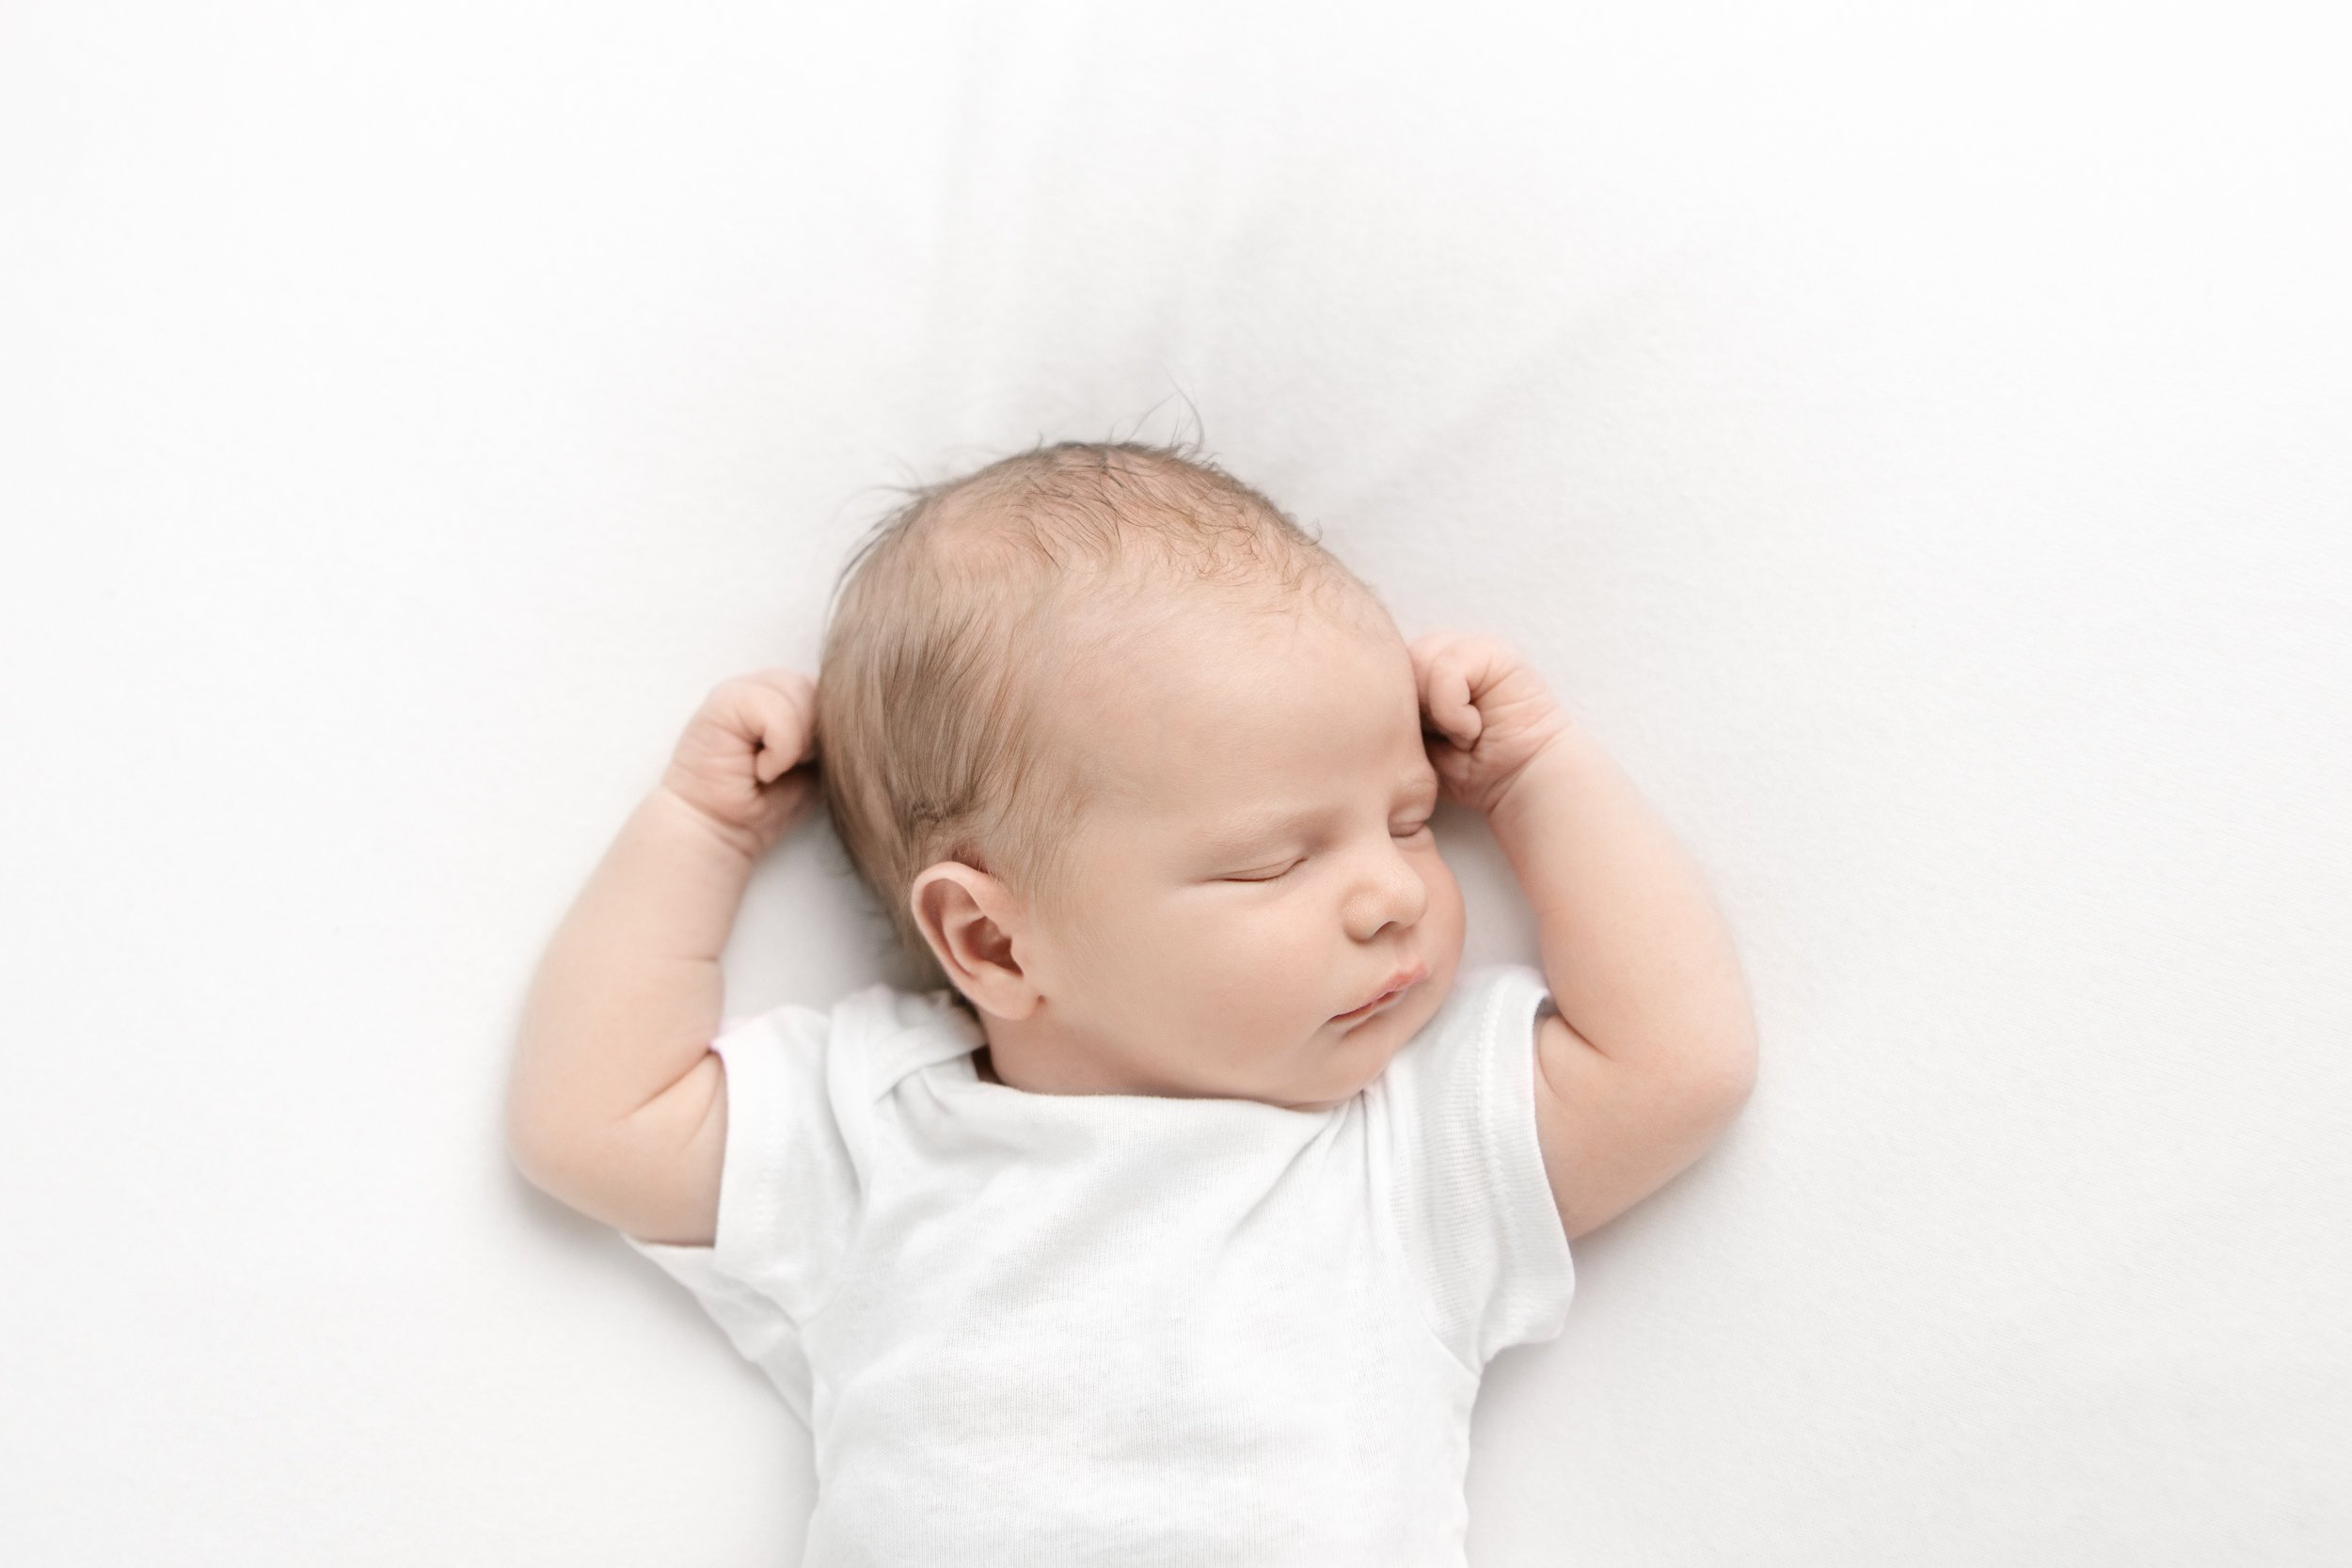  A newborn photographer in New Jersey captures a sleeping baby with both arms up by her head during a studio newborn session with Nicole Hawkins Photography. sleeping baby baby on a bed white studio inspiration flexing baby #nicolehawkinsphotography 